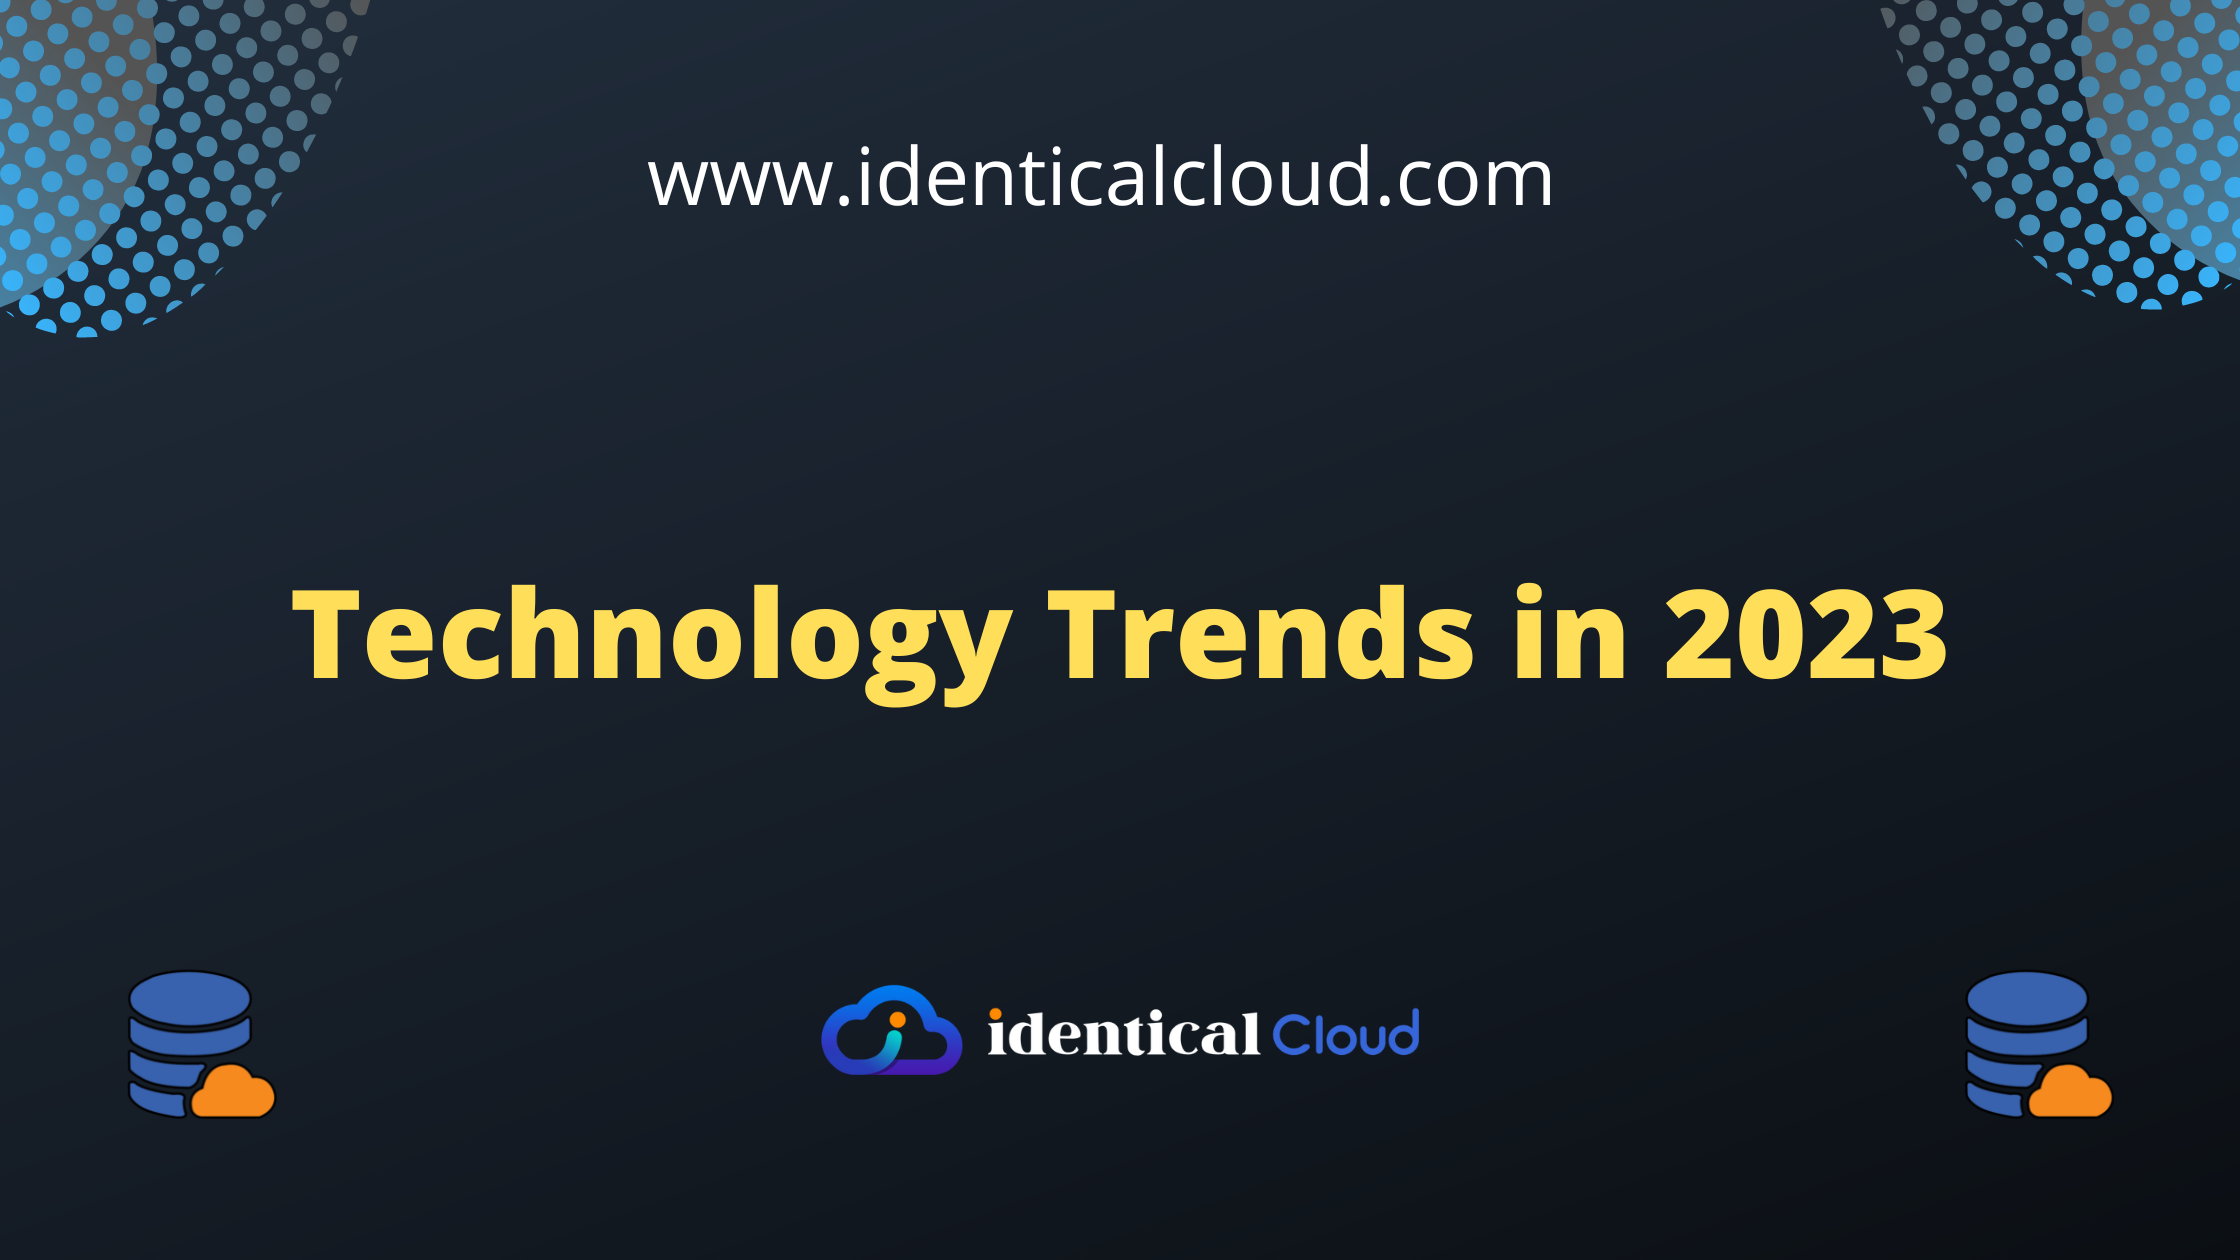 Technology Trends in 2023 - identicalcloud.com